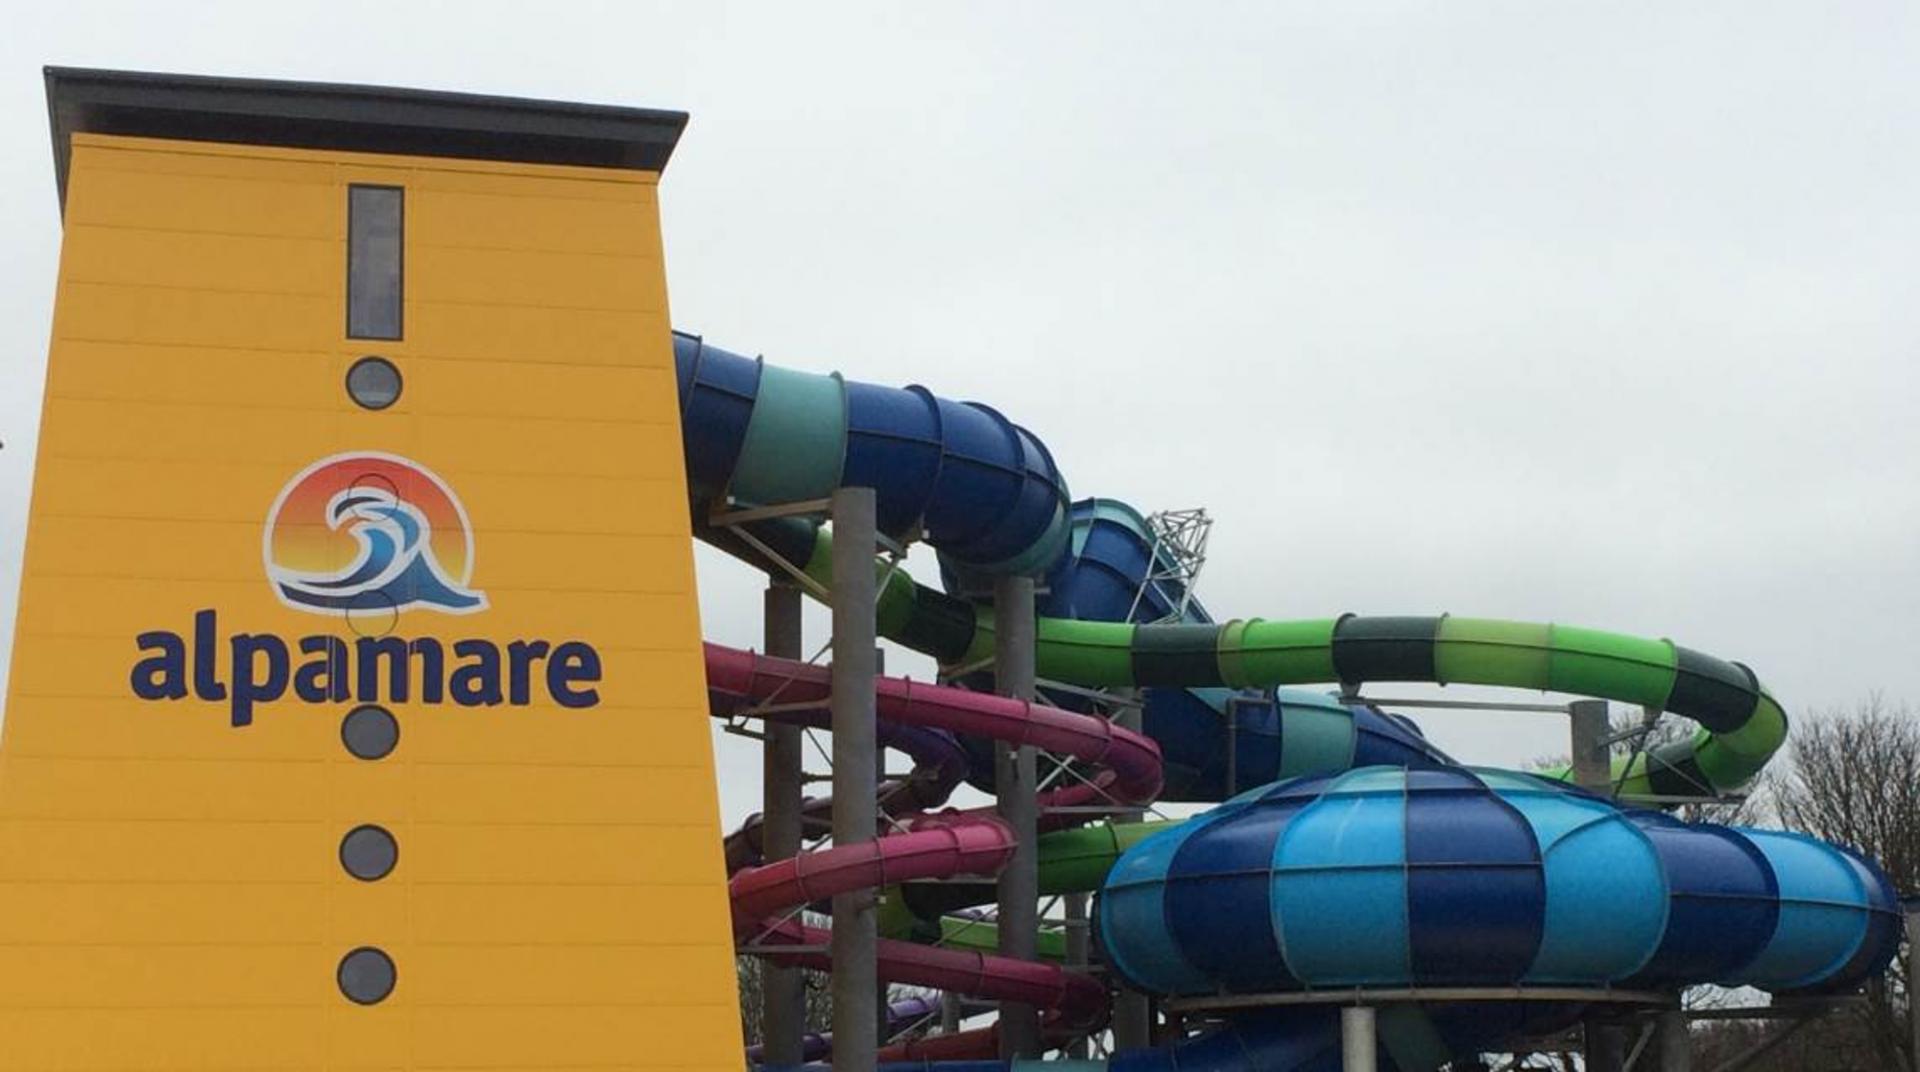 Water park sale options explored as owner enters administration 